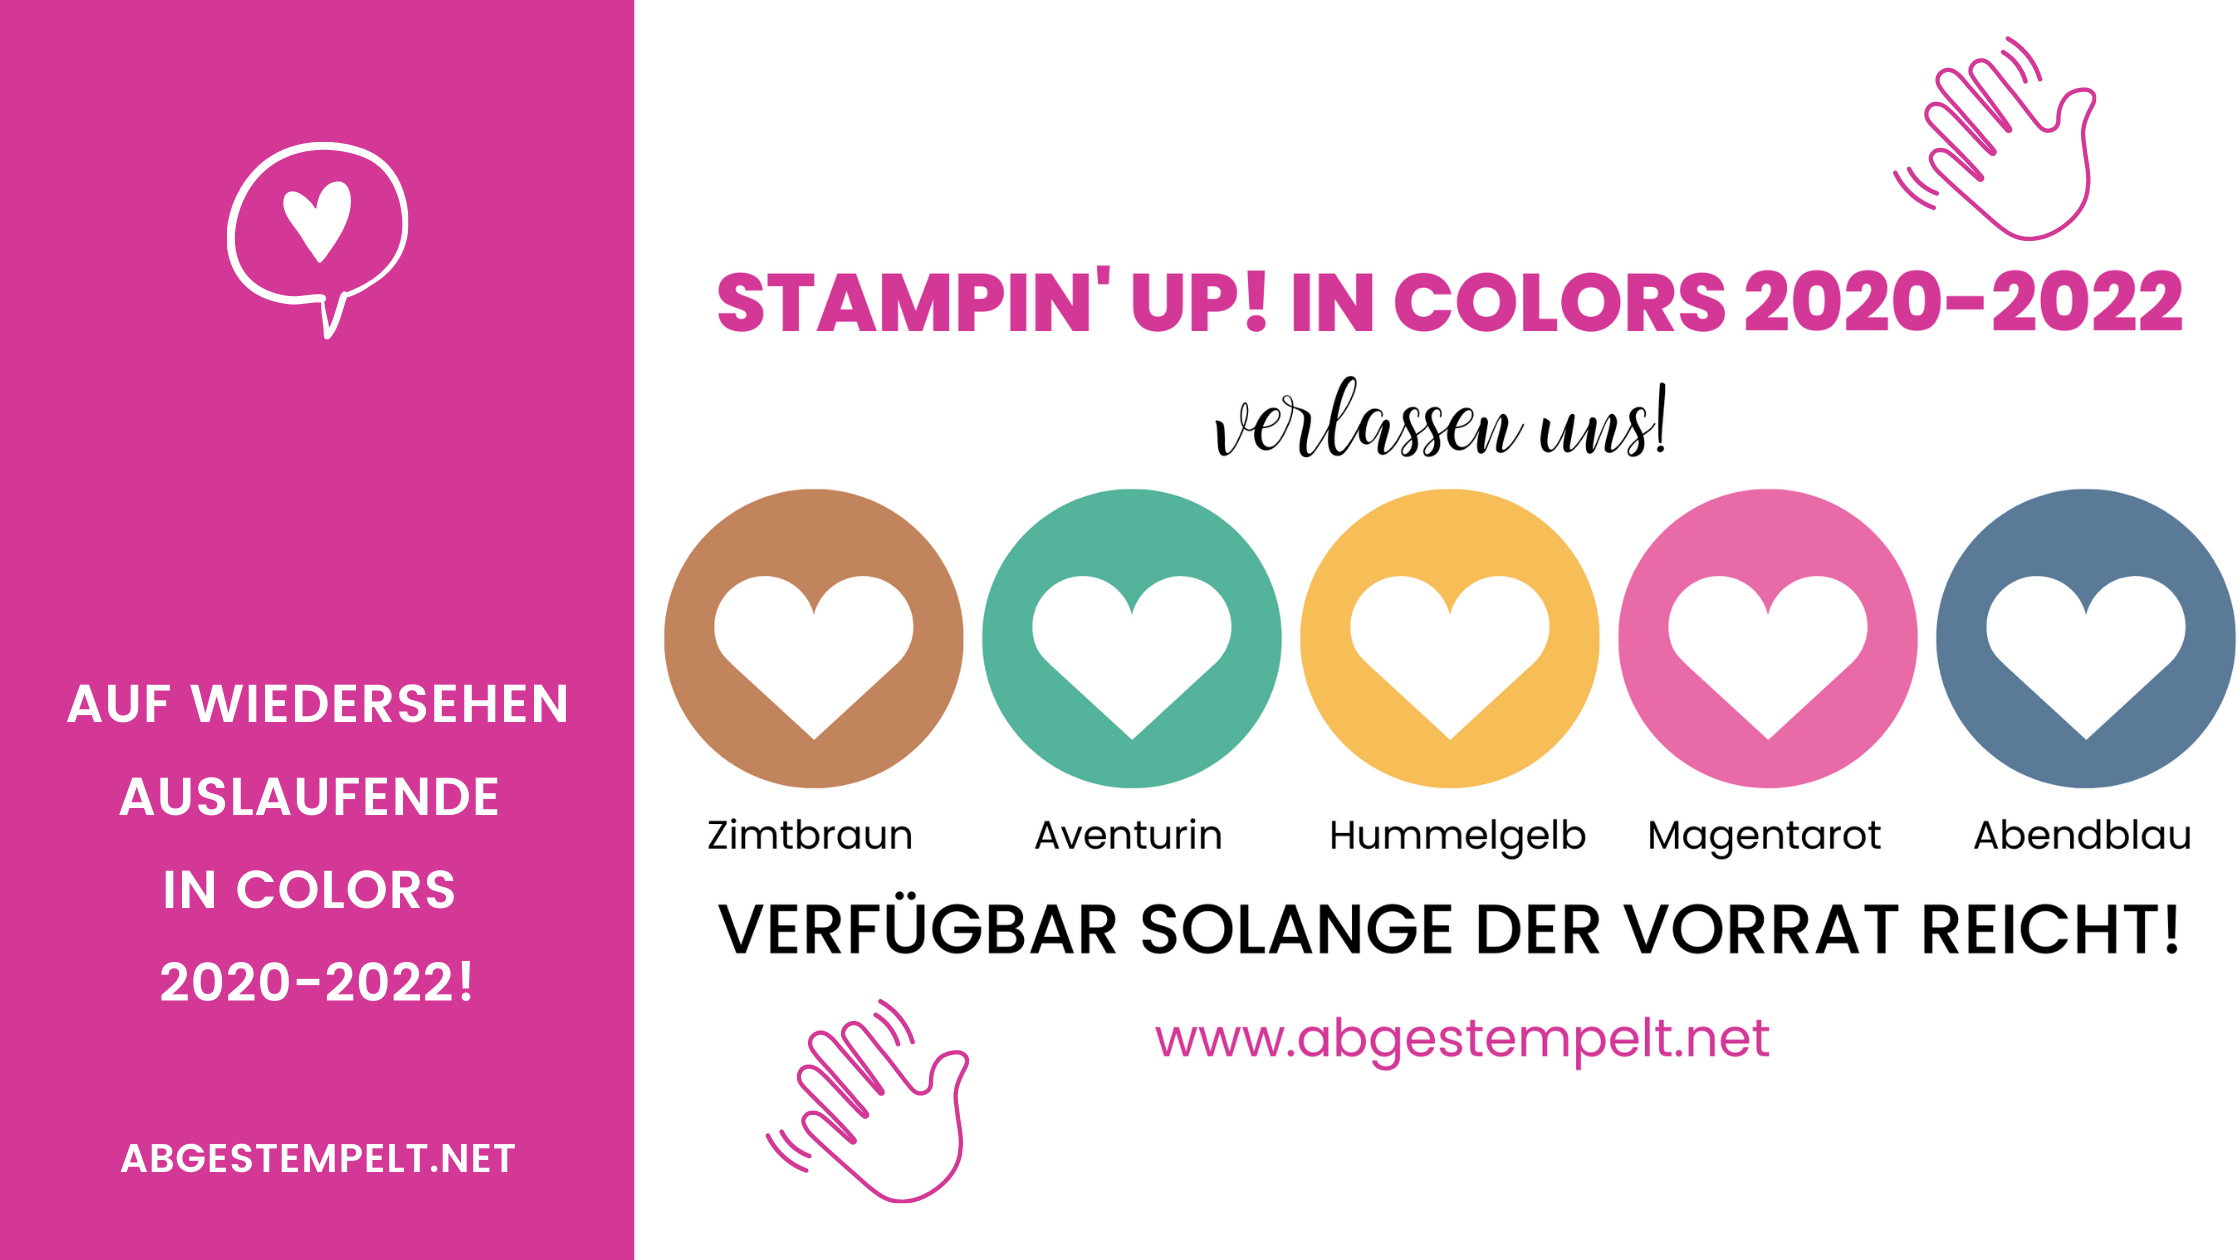 Blog stampin up In Colors 202022 auslaufend abgestempelt